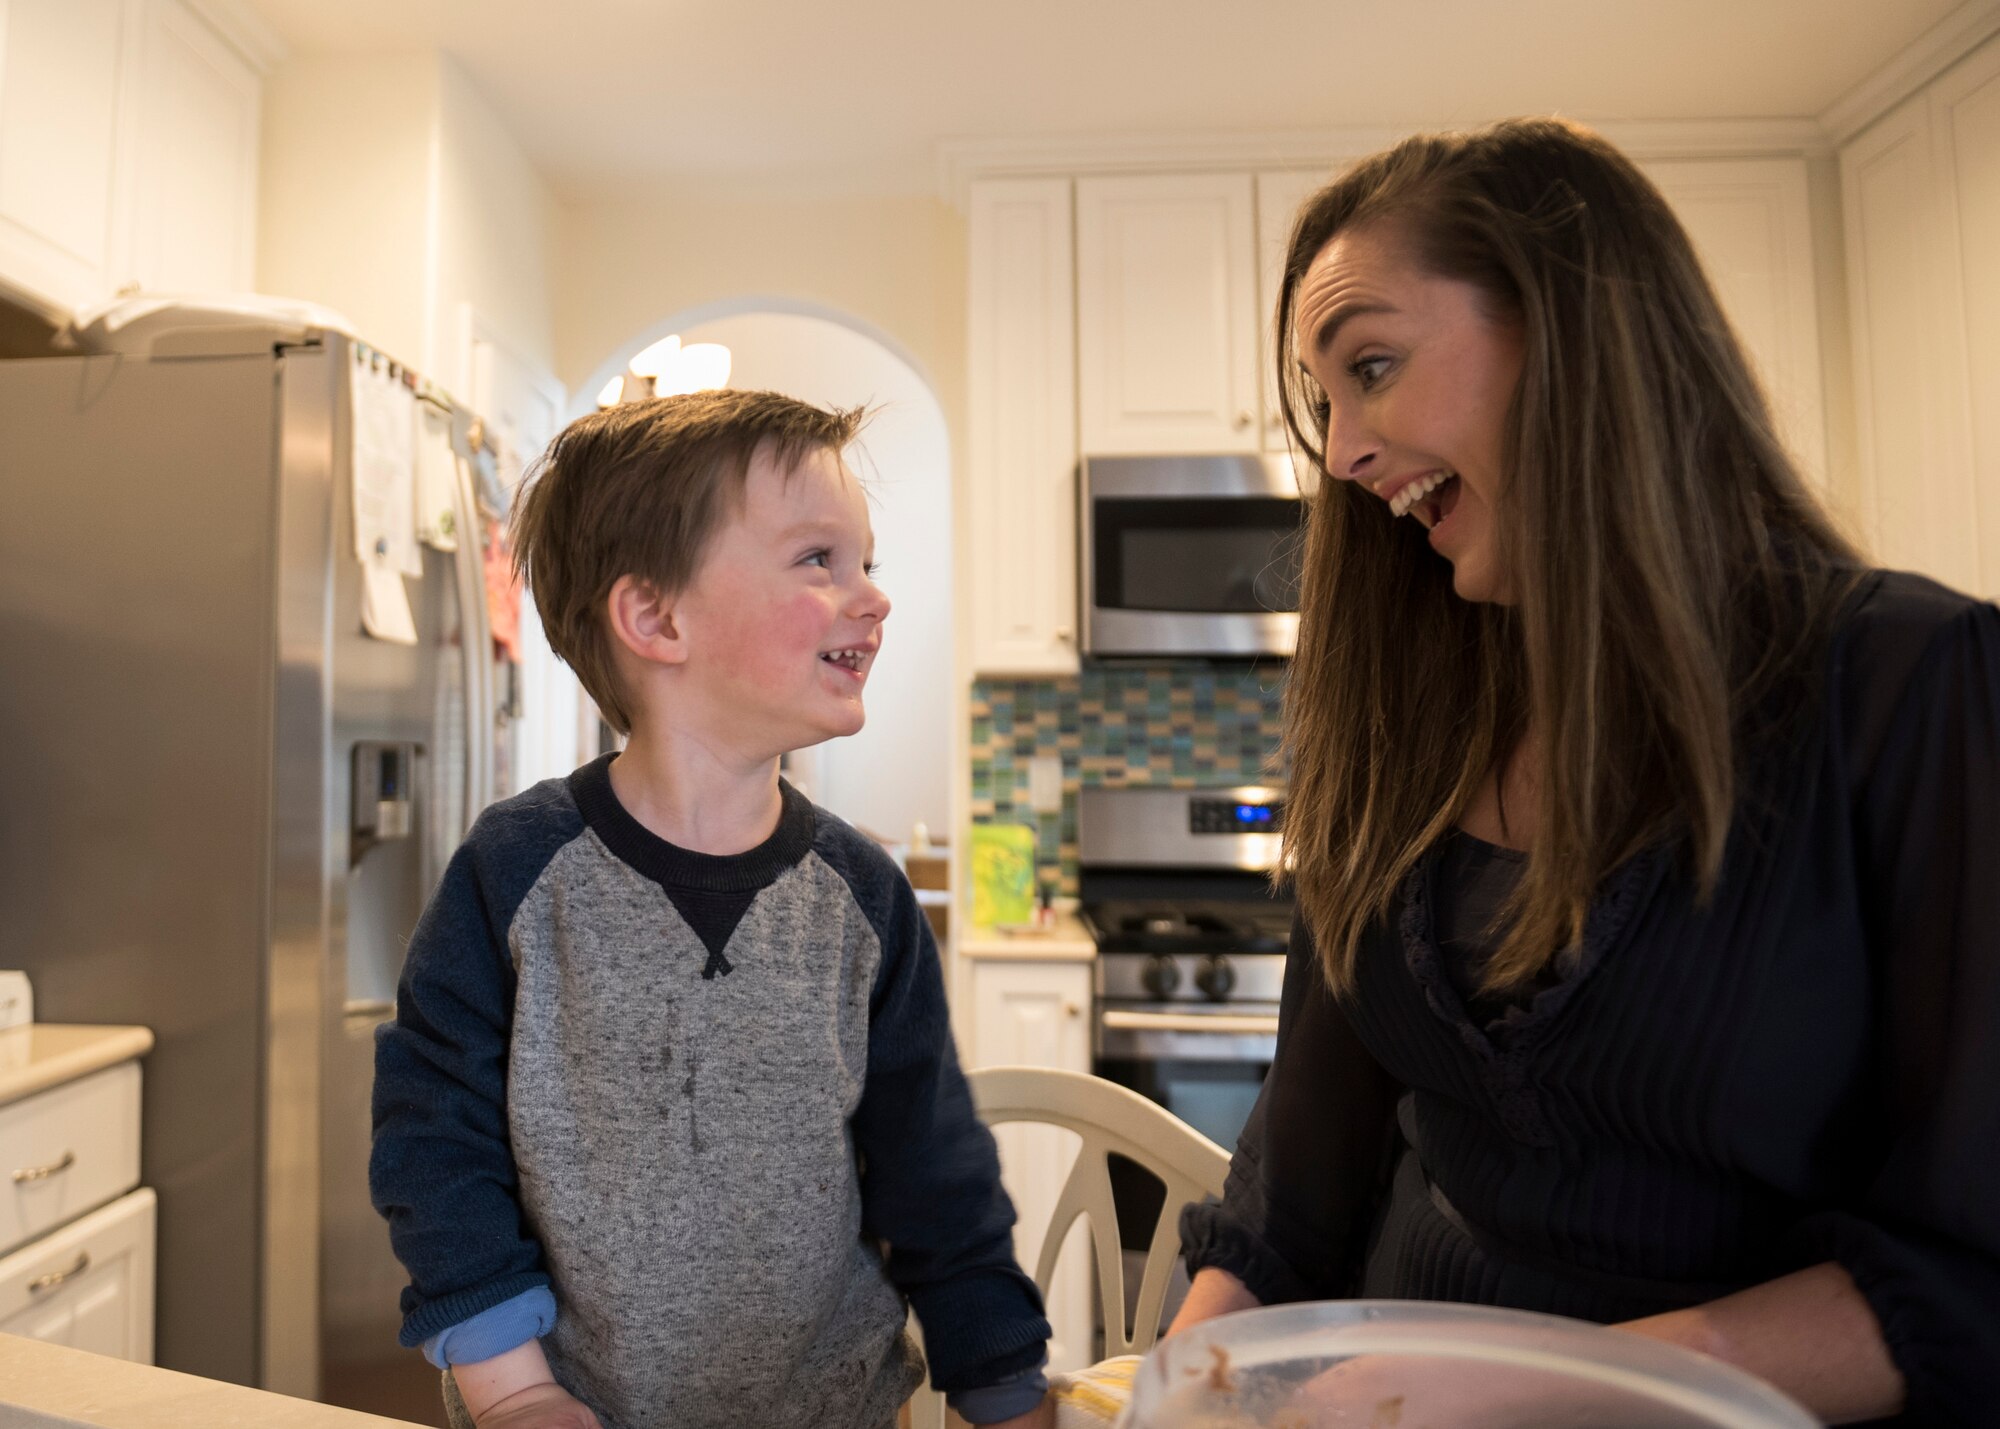 Morgan Noller laughs with her son, Camden, in their home in Vacaville, California, Dec. 5, 2018. Noller won the 2018 Joan Orr Air Force Spouse of the Year Award. (U.S. Air Force photo by Lan Kim)